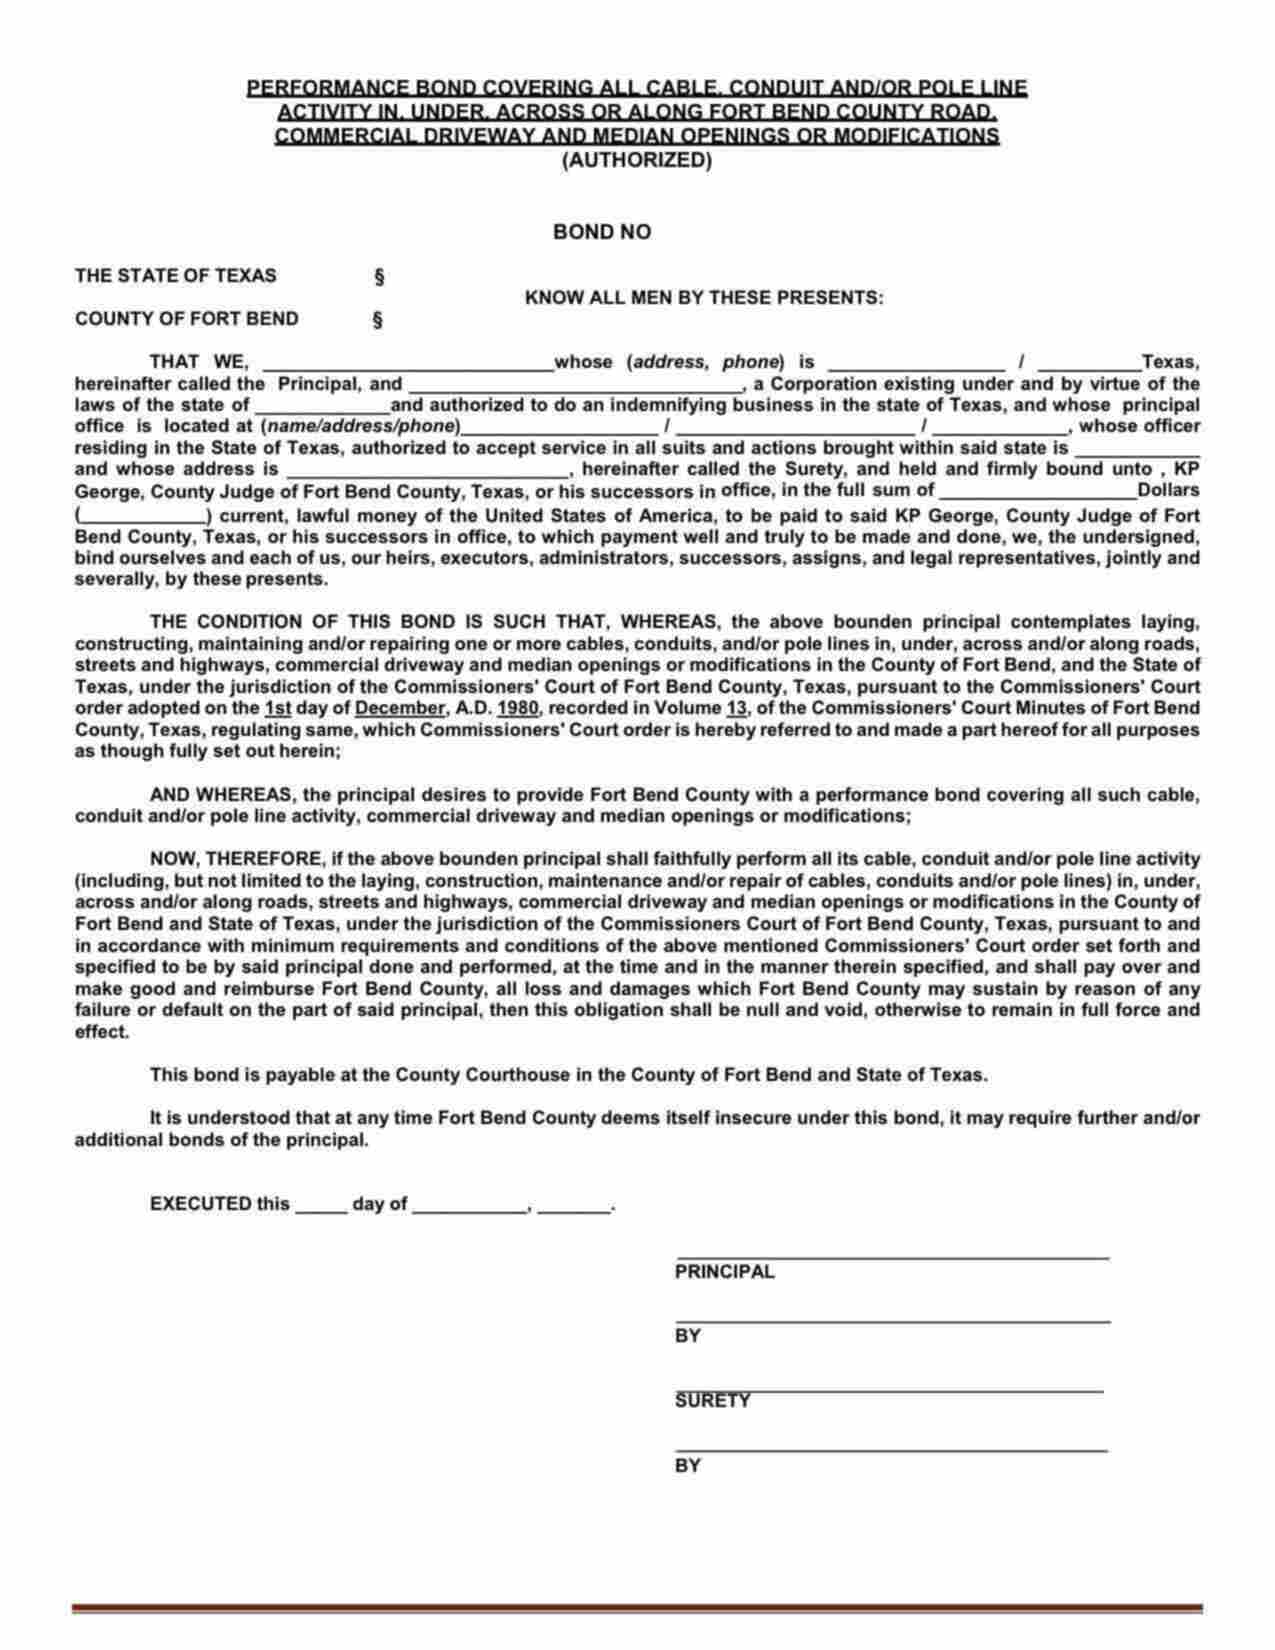 Texas Cable, Conduit and Pole Line Right of Way Performance Bond Form